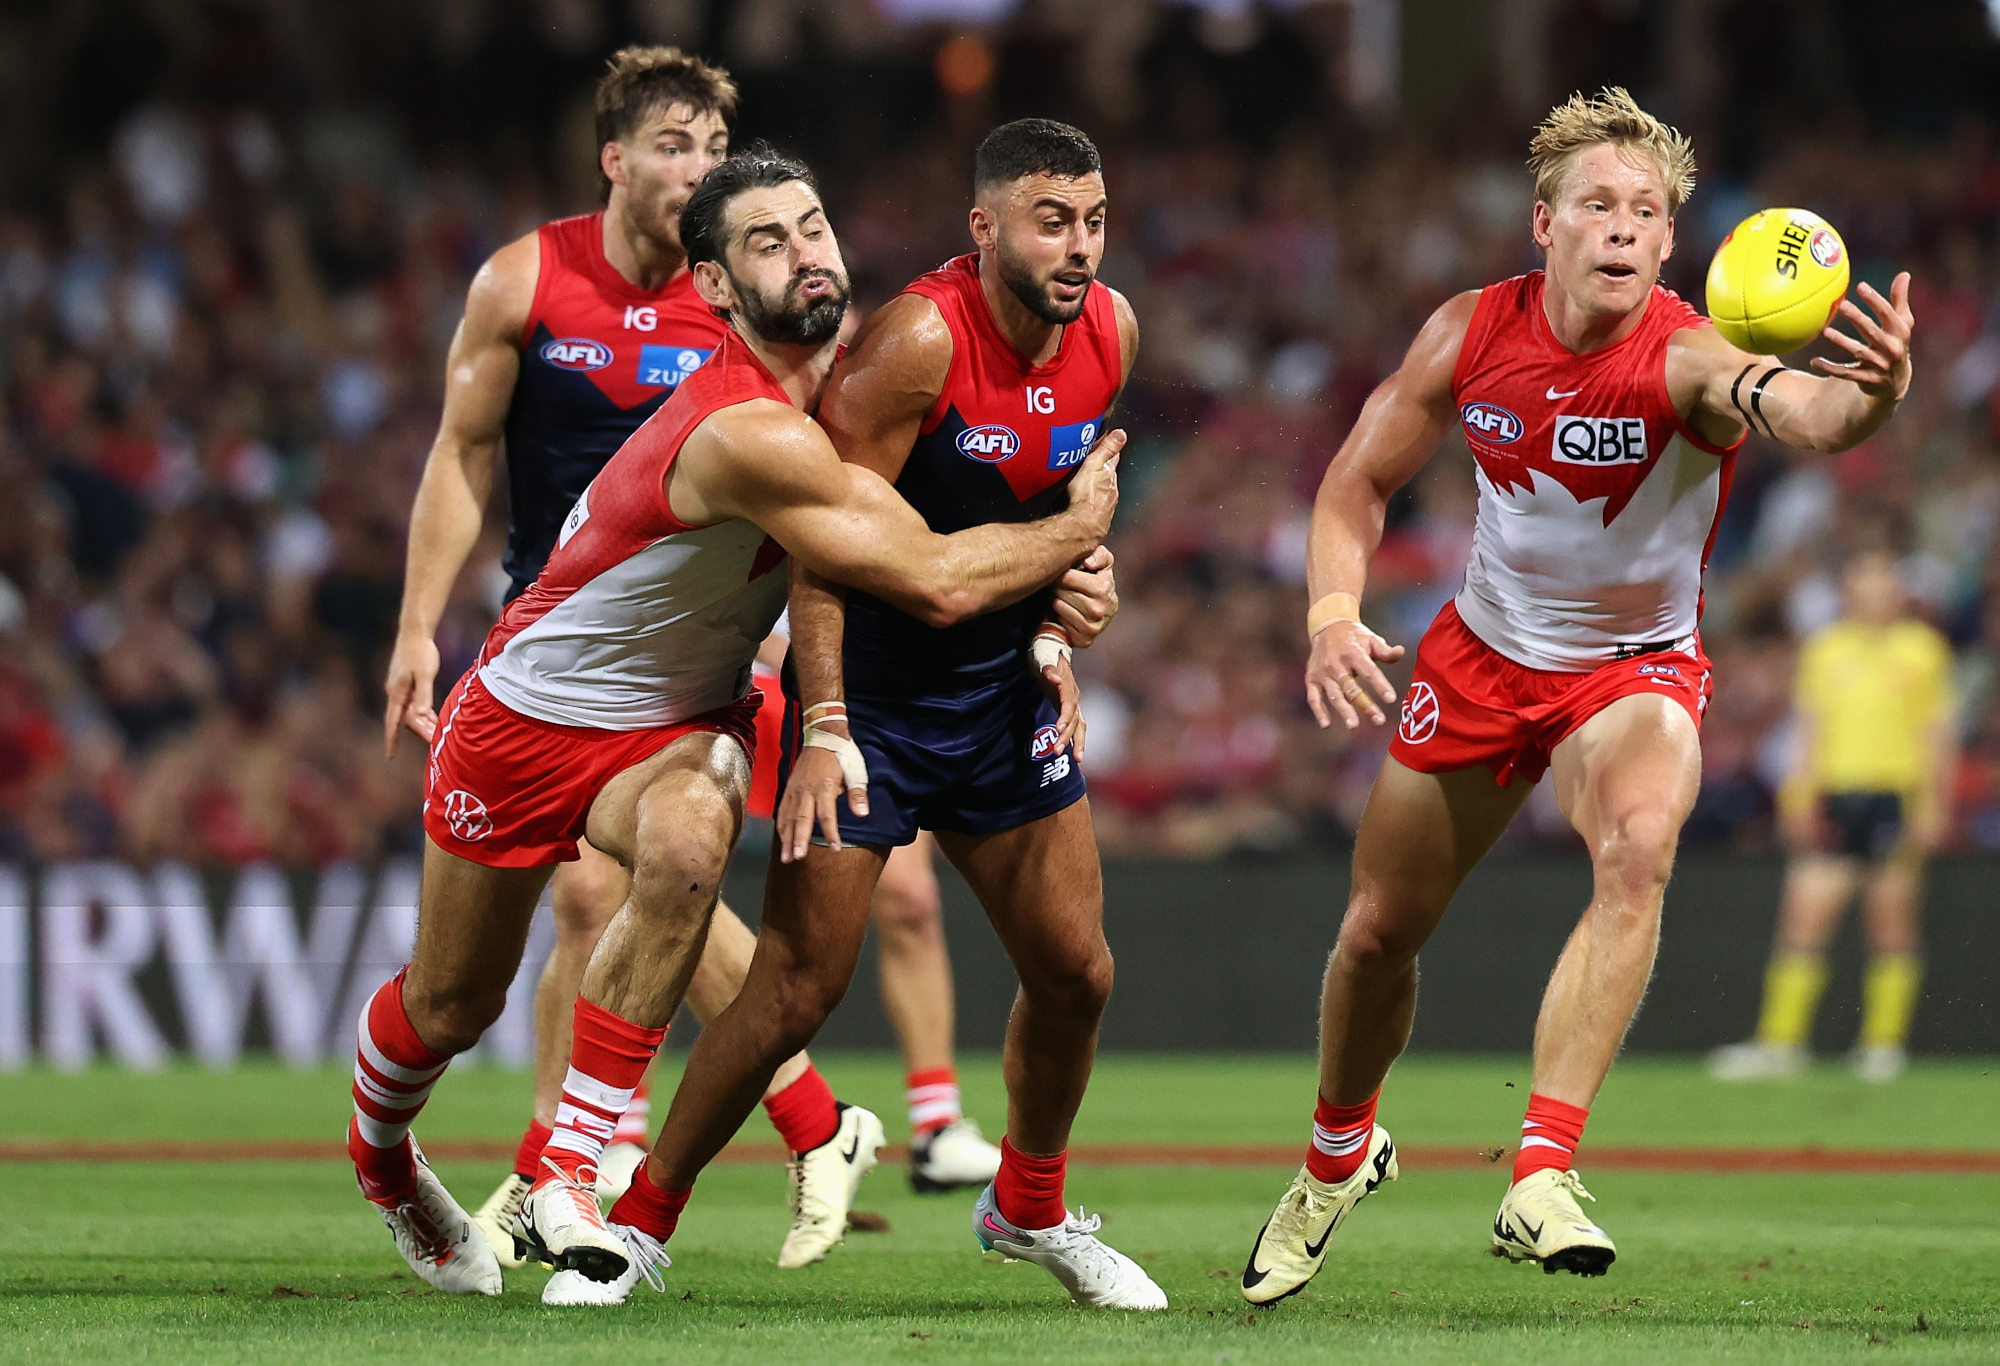 Christian Salem reacts to pressure from Brodie Grundy and Isaac Heeney.